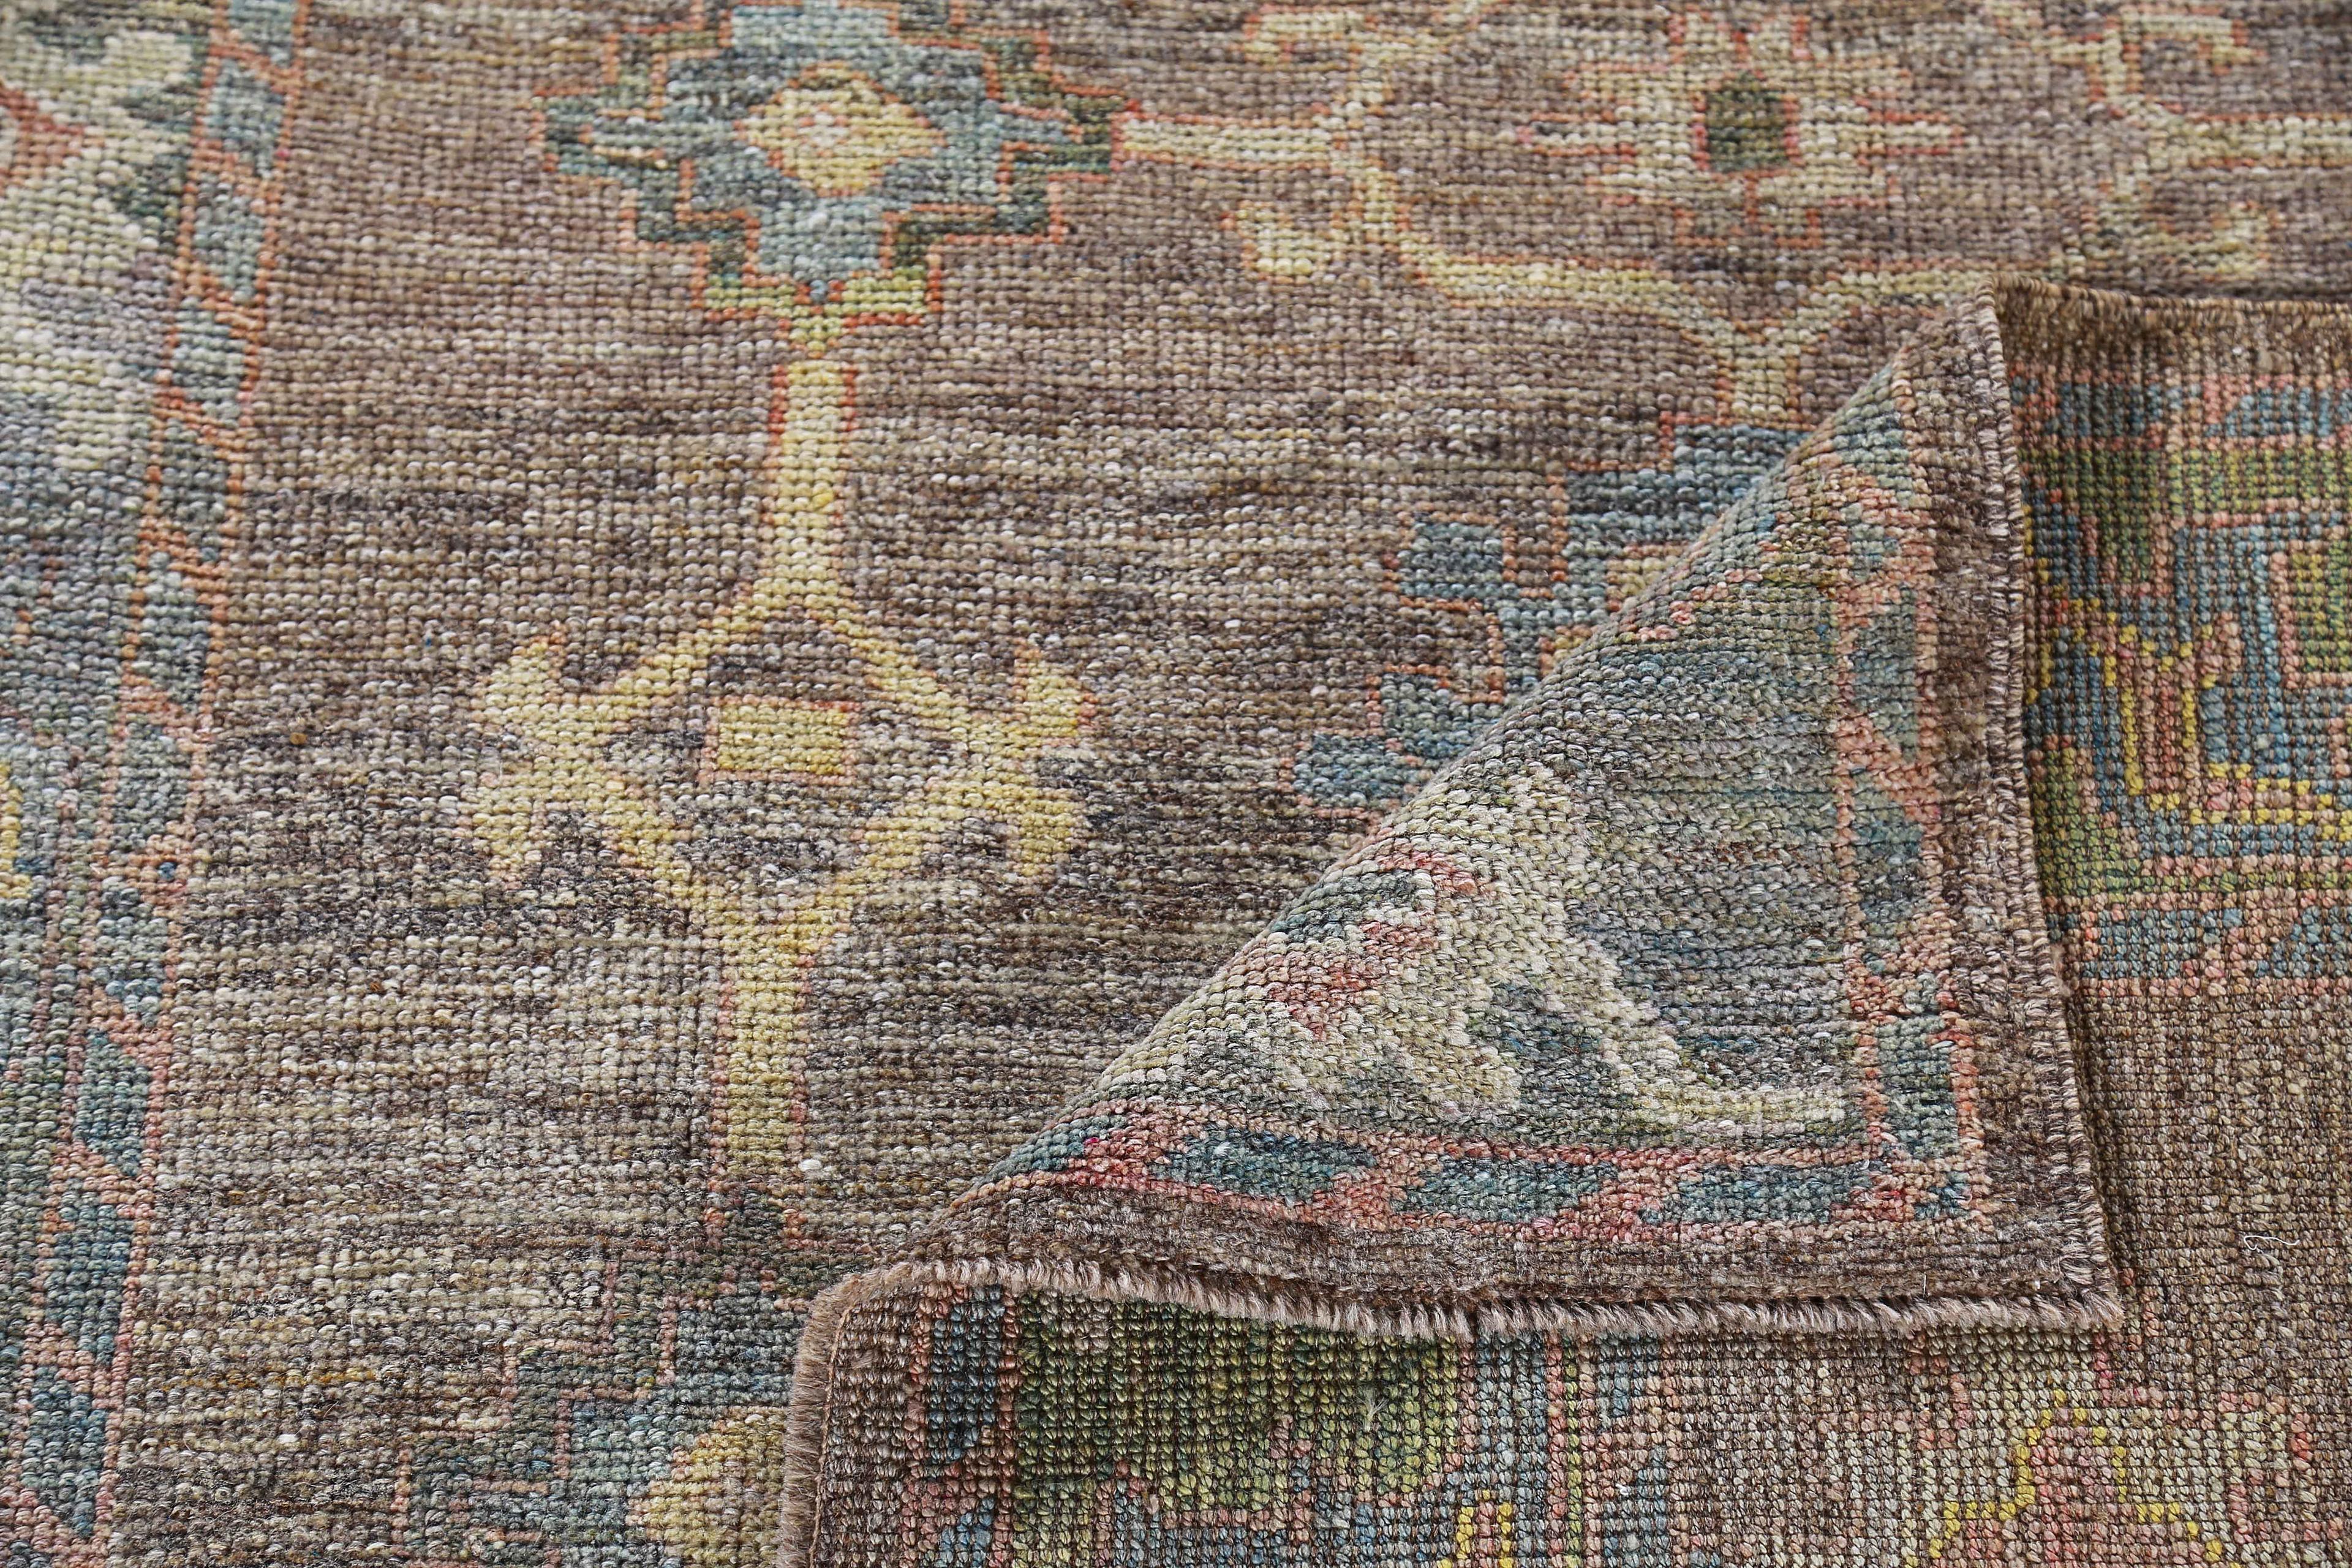 Beautiful Small Earth Tone Modern Turkish Oushak Rug. Country of Origin: Turkey/ Circa Date: Modern - Size: 5 ft 1 in x 6 ft 5 in (1.55 m x 1.96 m).